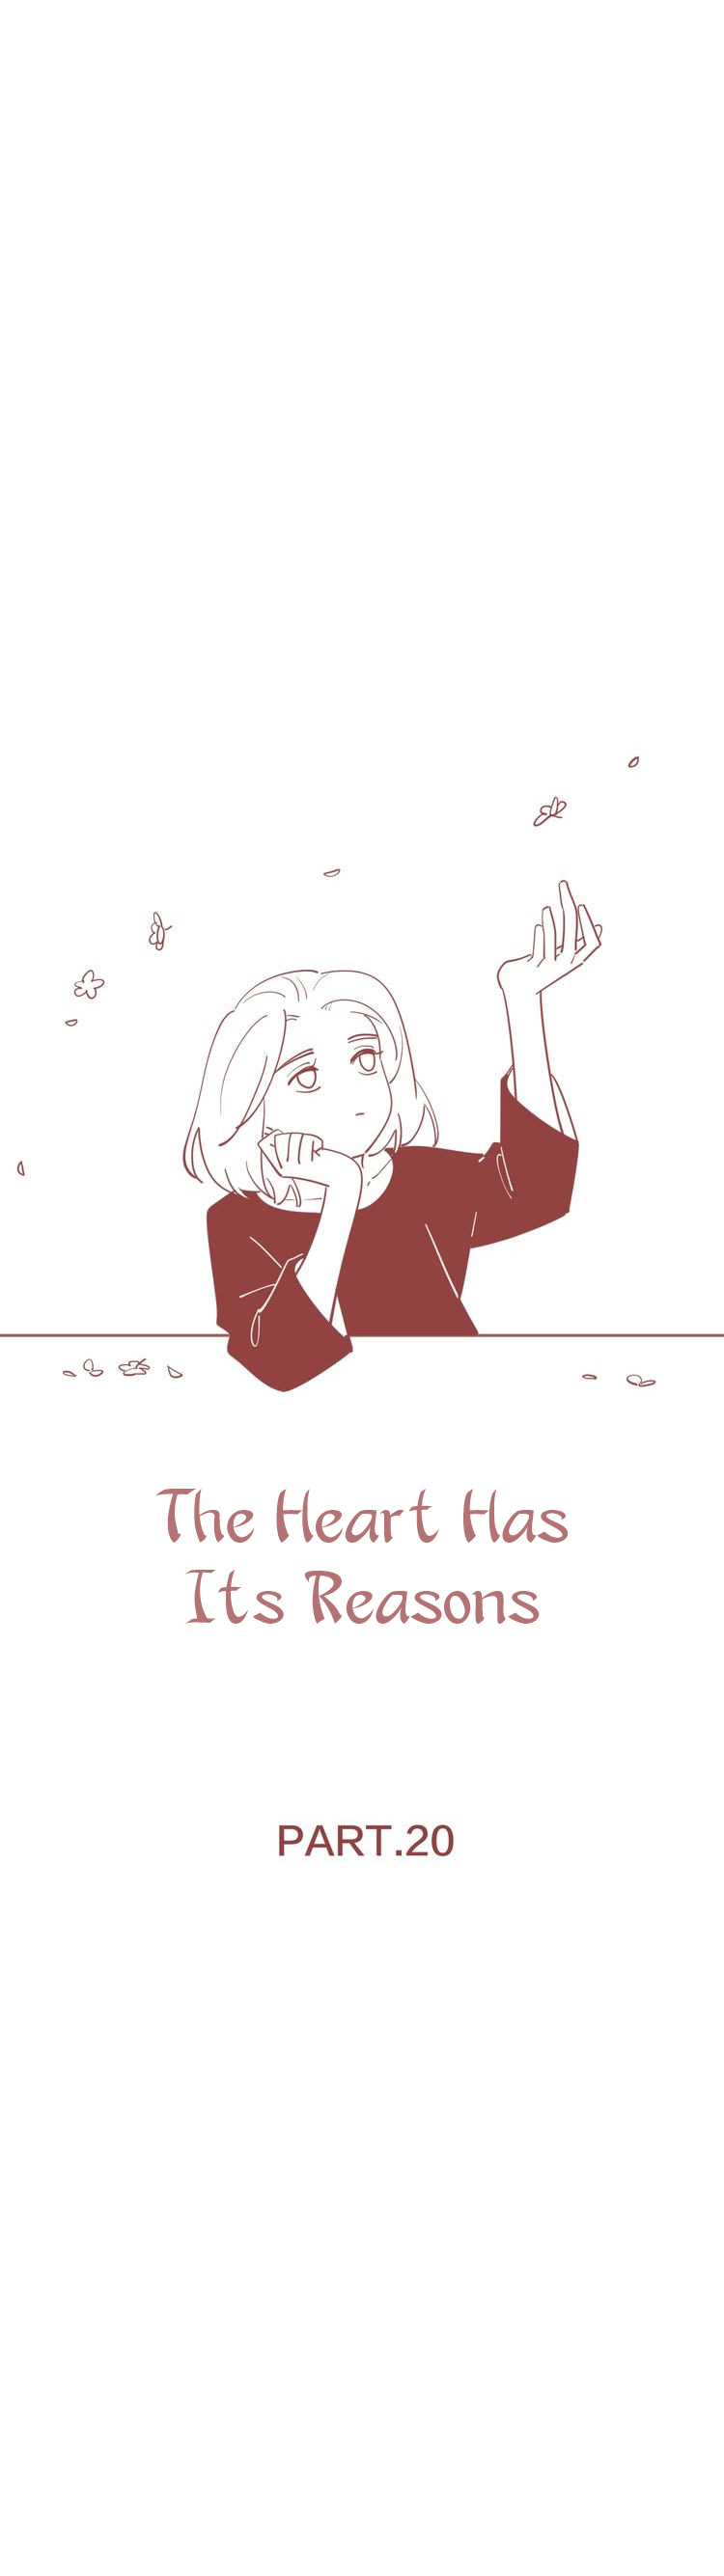 The Looks Of Love: The Heart Has Its Reasons Vol.1 Chapter 20